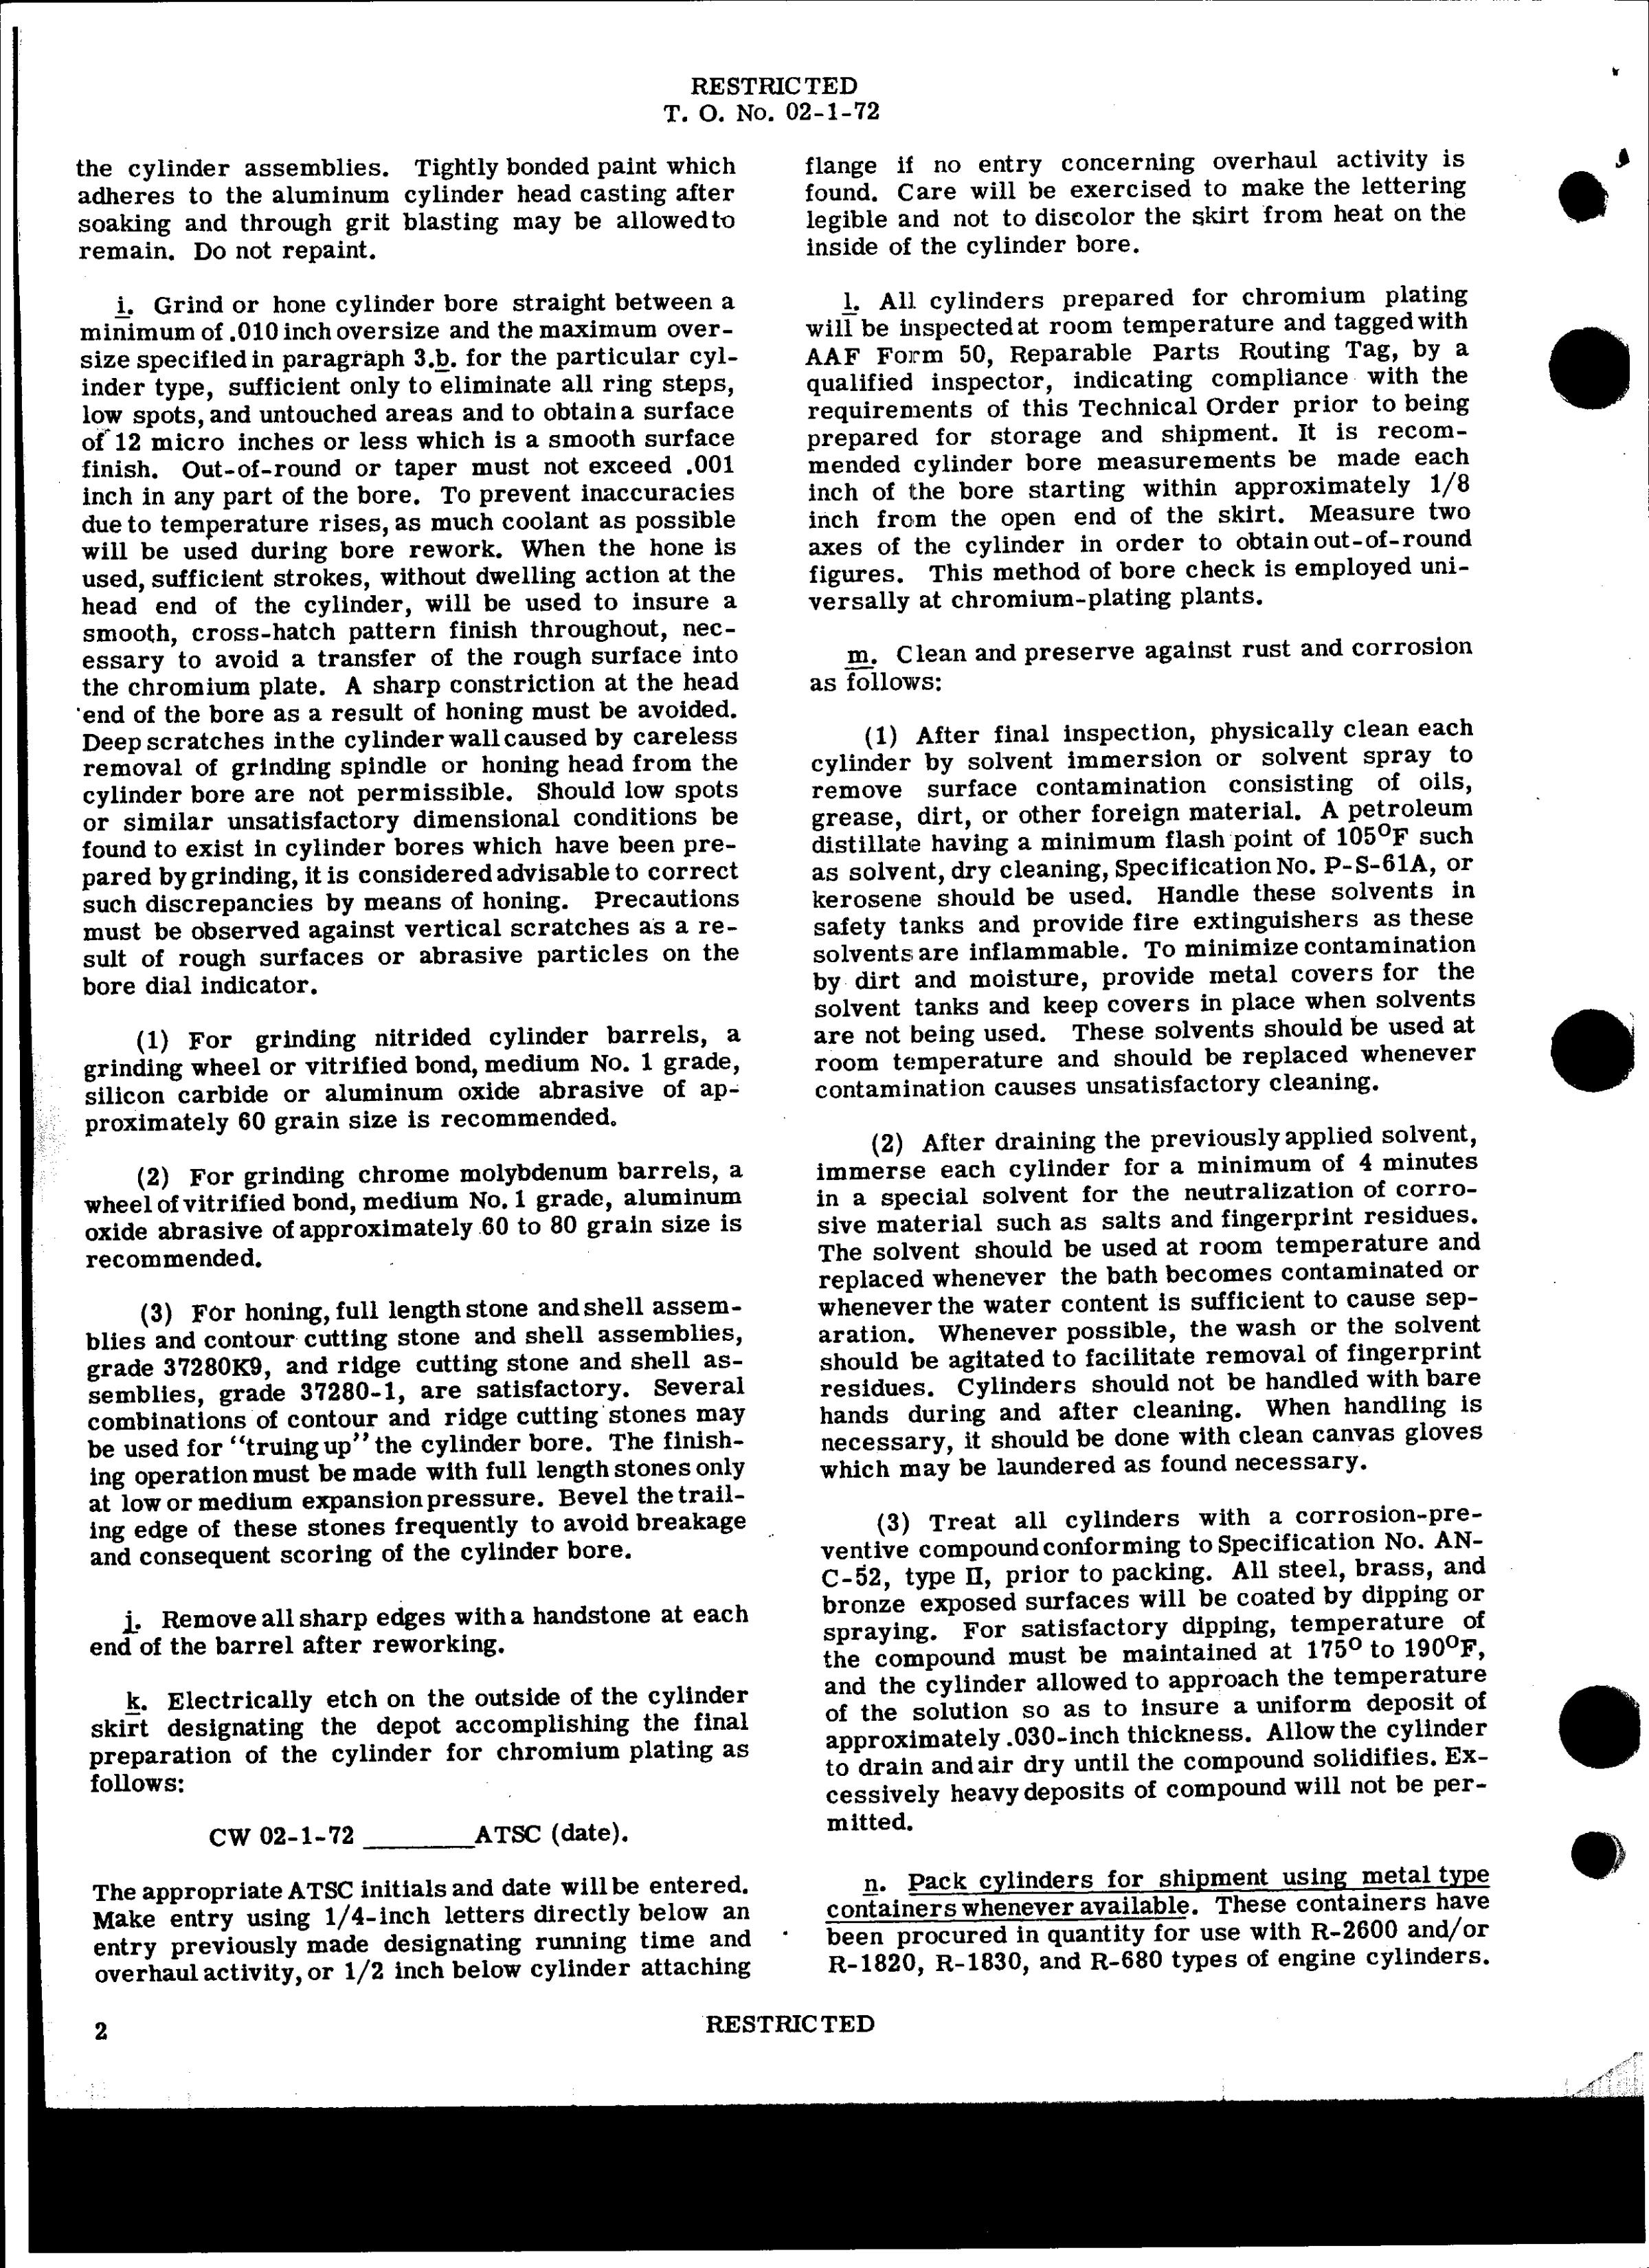 Sample page 2 from AirCorps Library document: Preparation of Aircraft Engine Cylinders for Chromium Plating